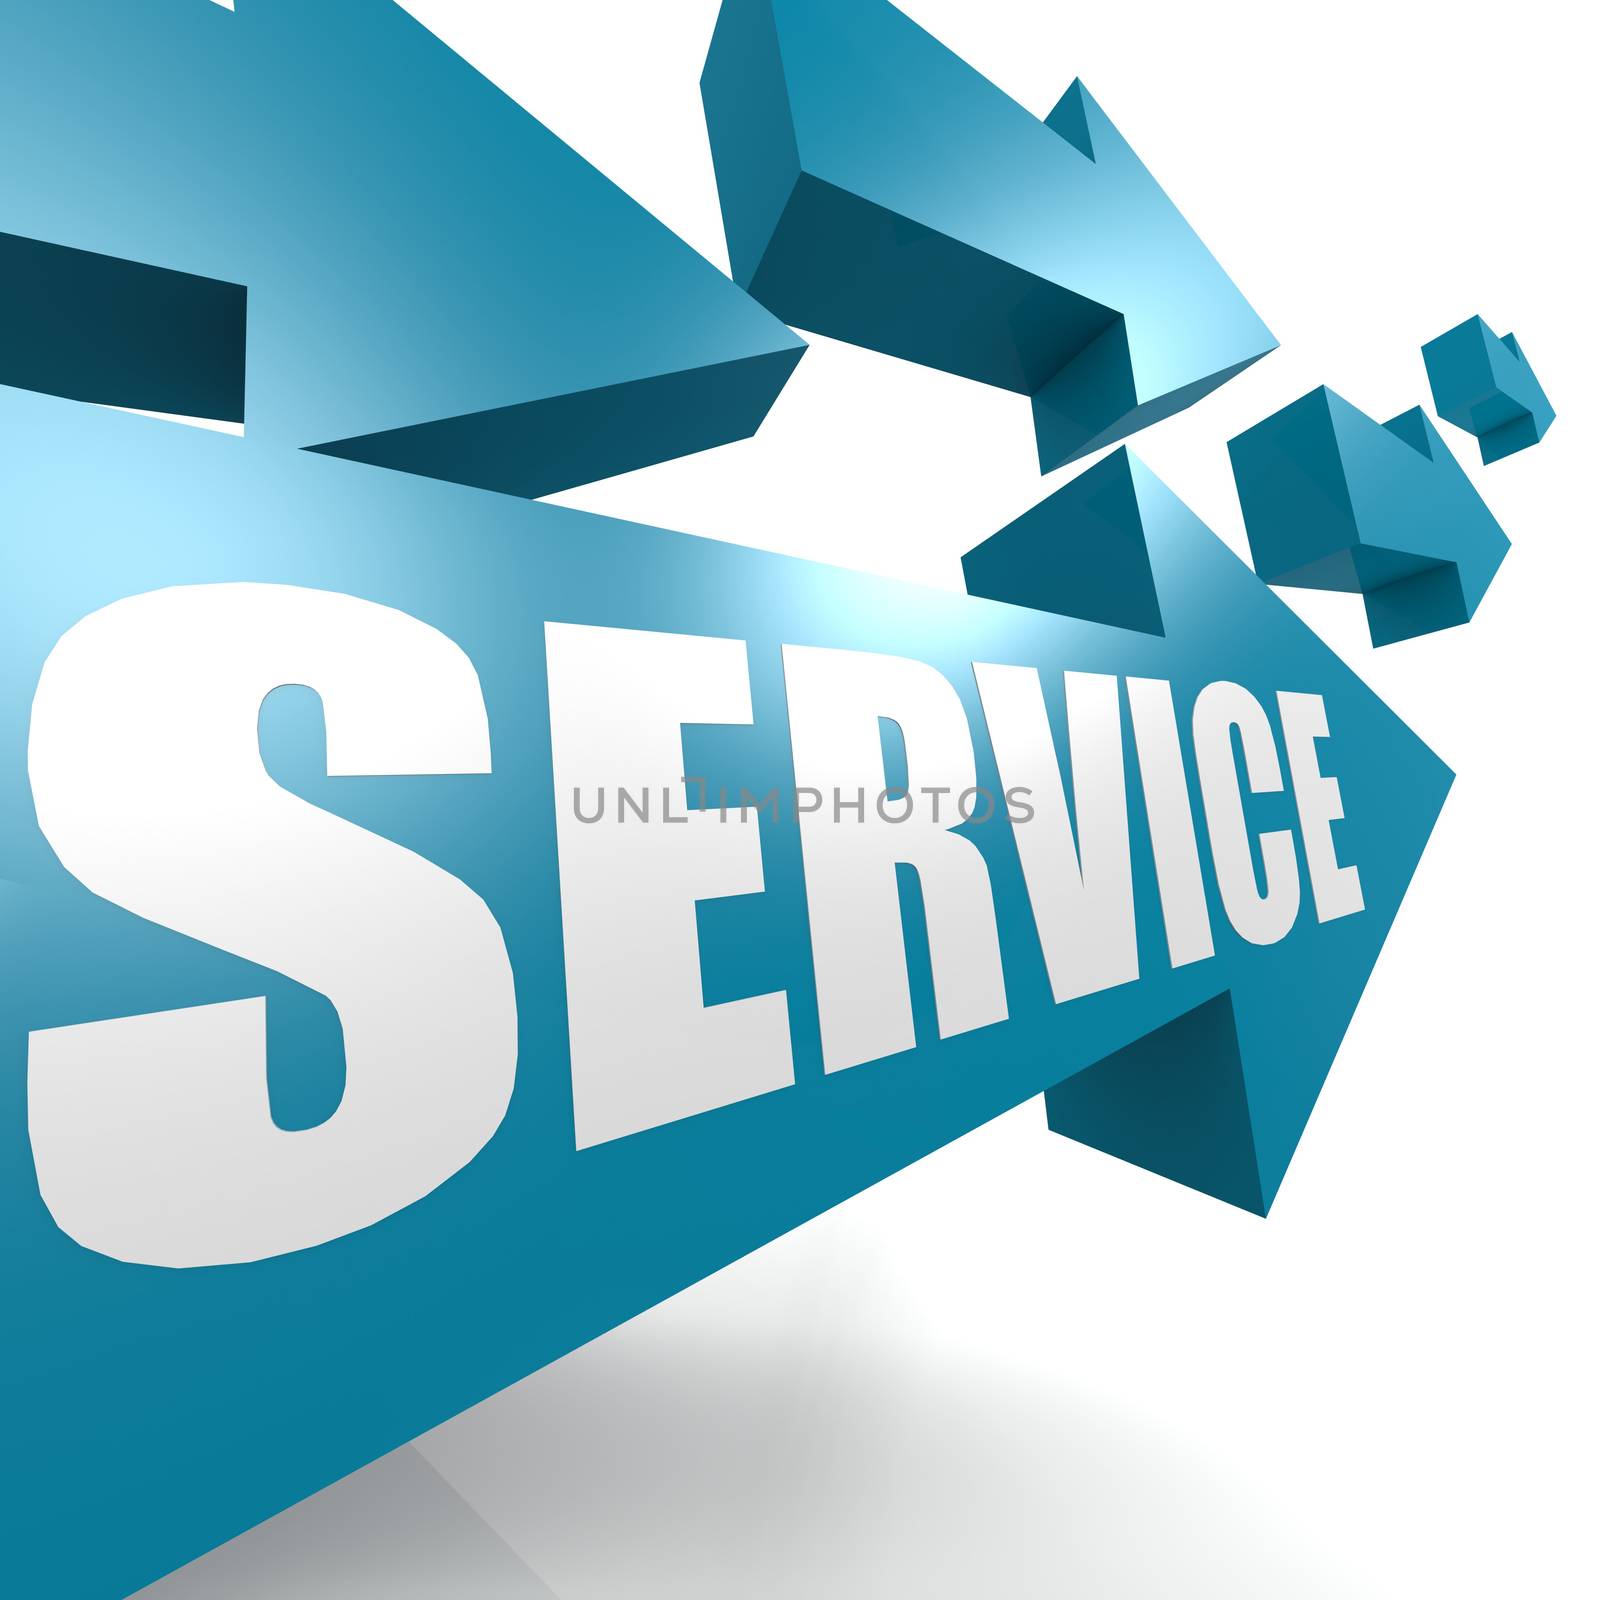 Service arrow in blue by tang90246